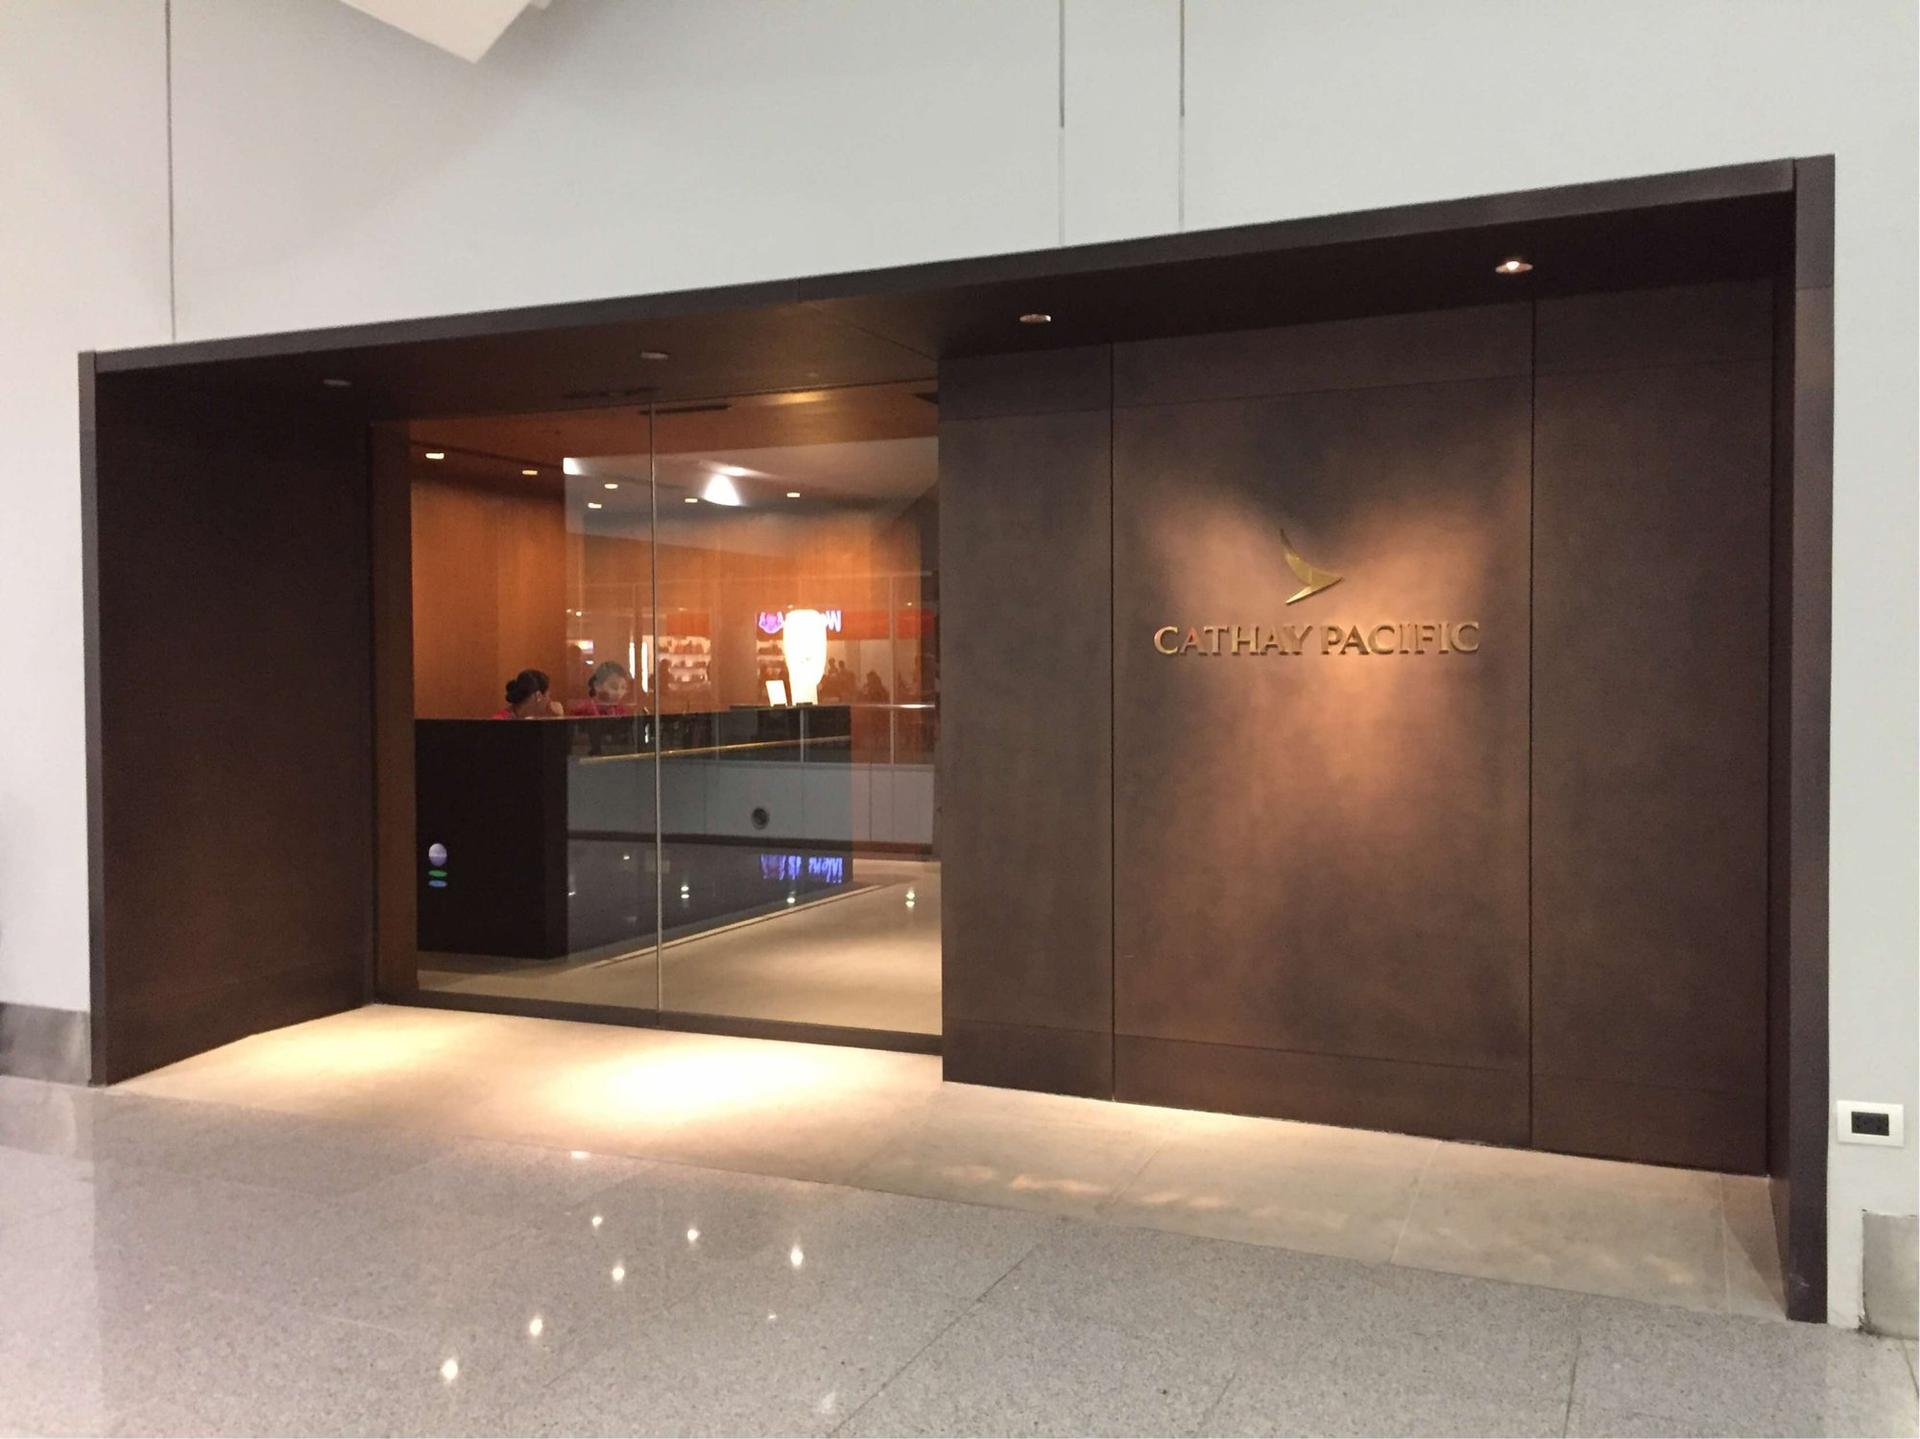 Cathay Pacific First and Business Class Lounge image 16 of 19